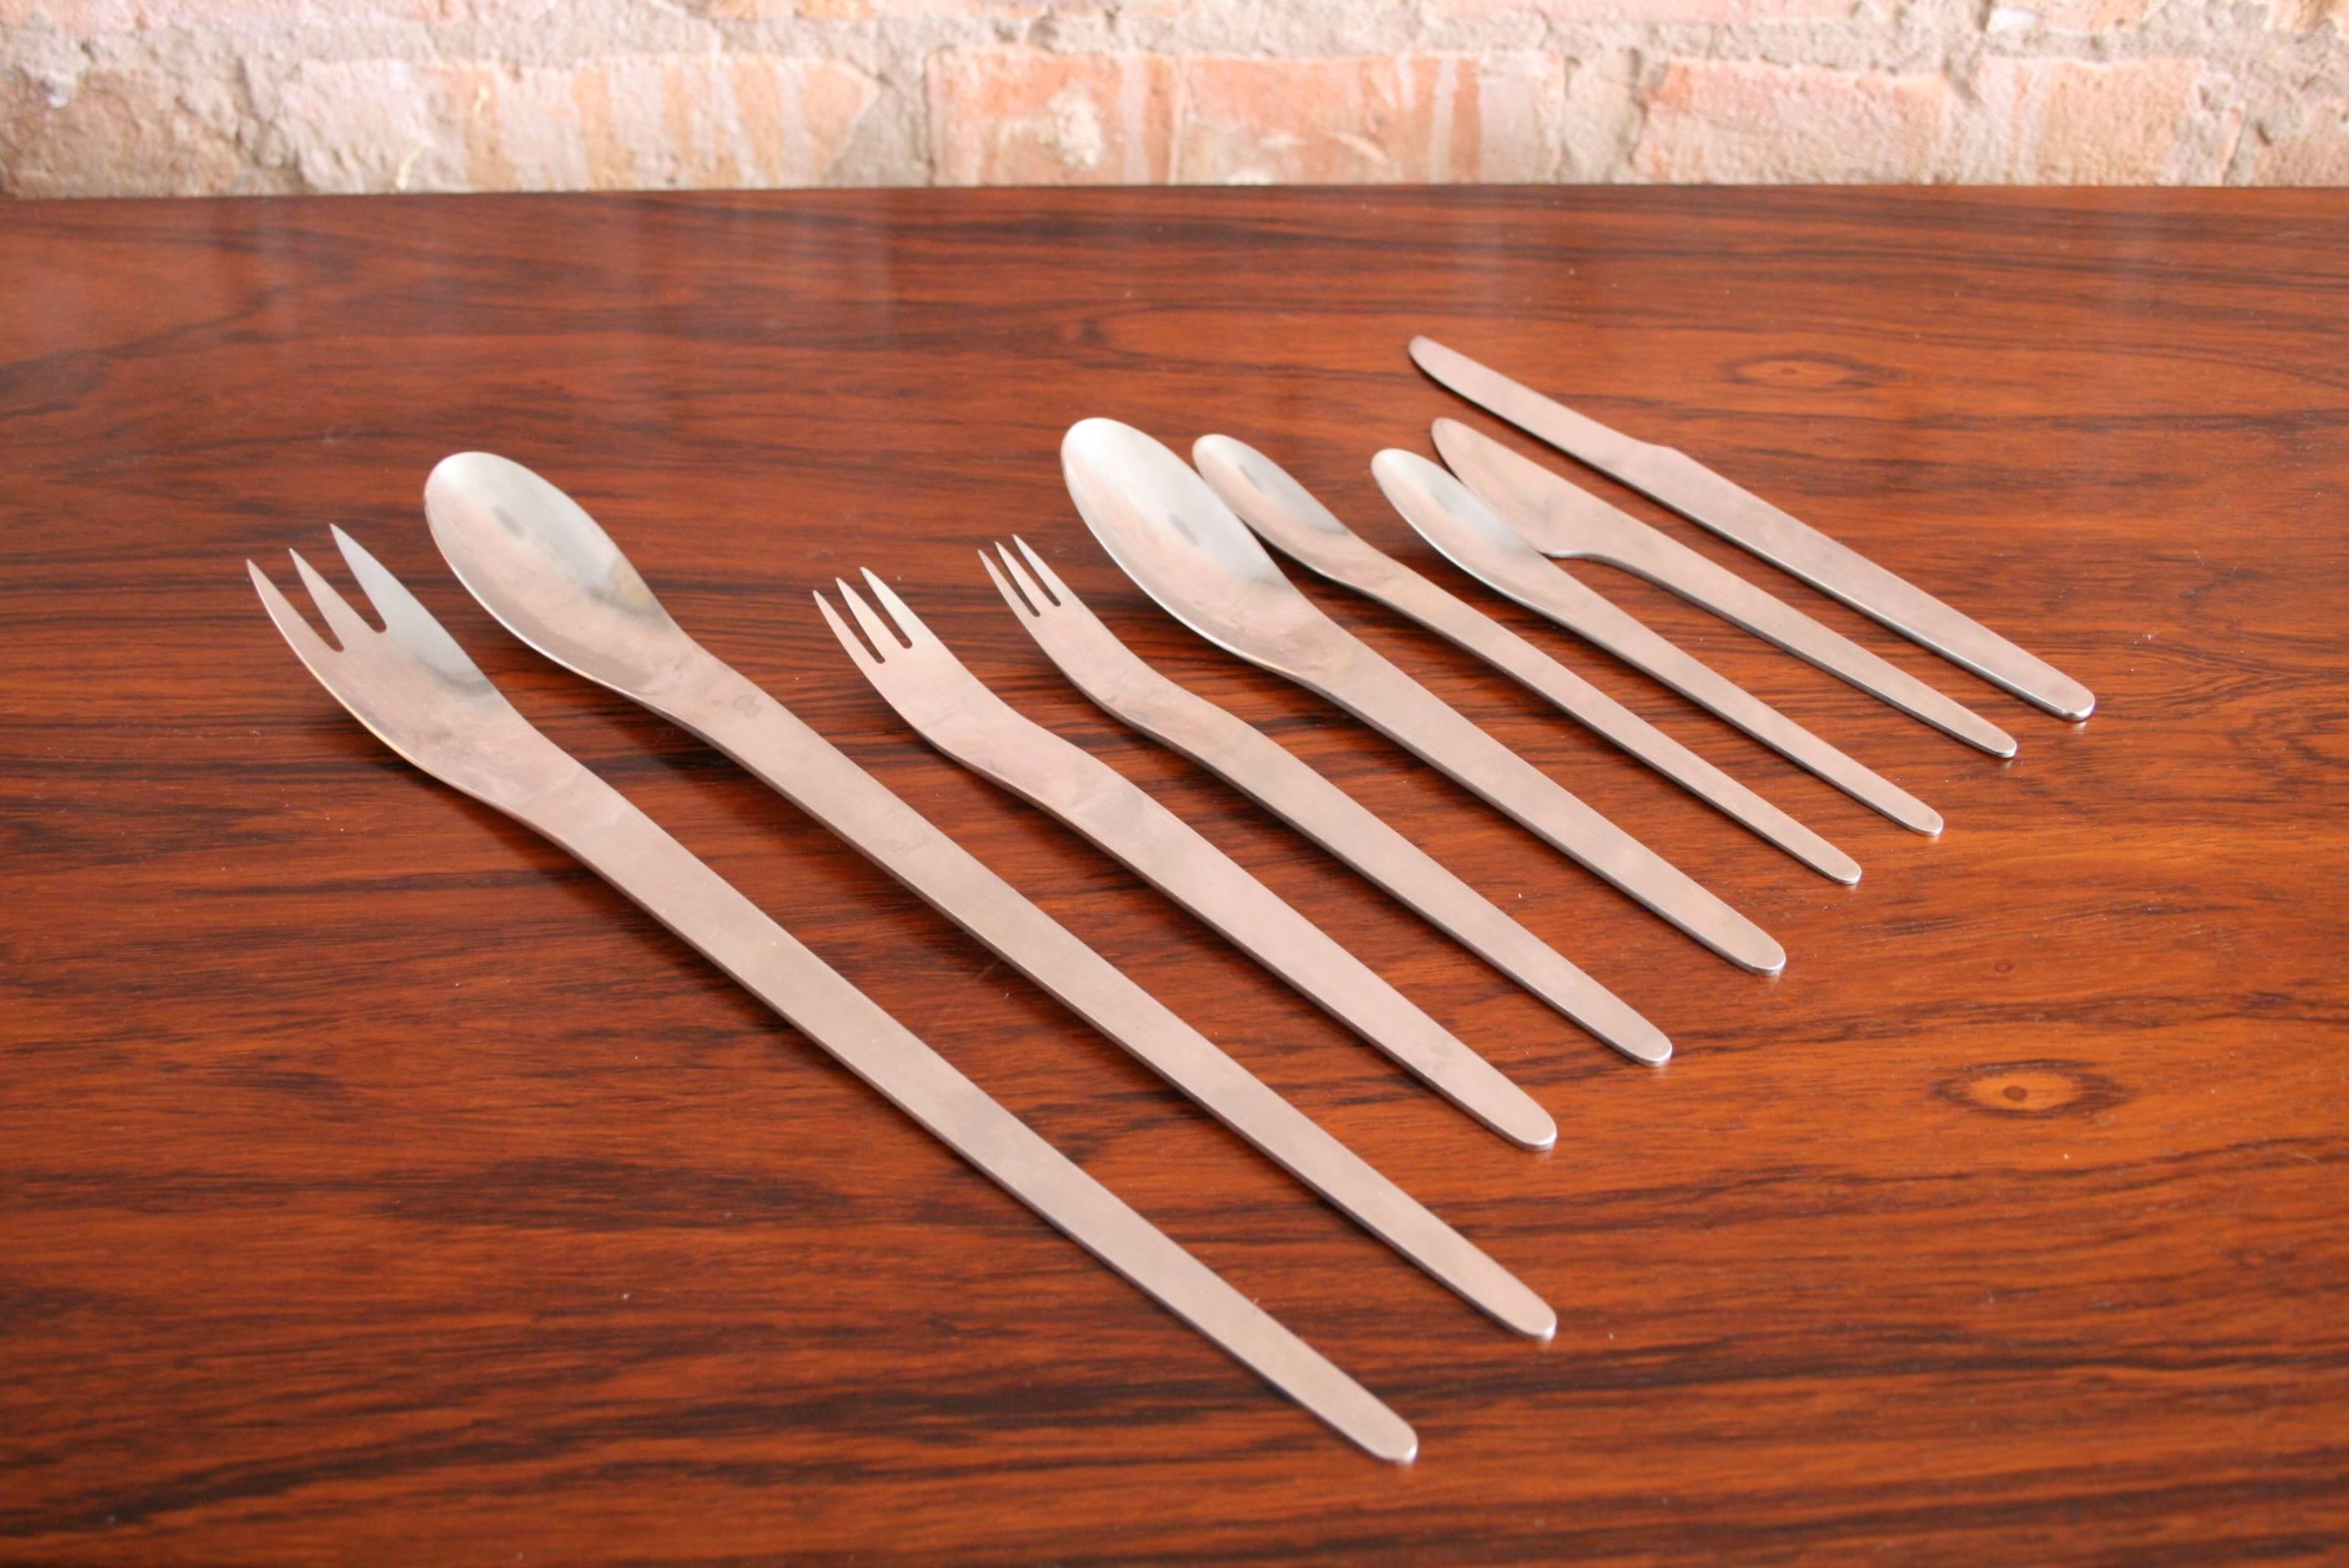 All signed A Michelsen, Denmark
The set includes service for 11:

One pair of large servers
11 large forks
11 small forks
11 large spoons
11 small spoons
11 tea spoons
11 butter knives
11 small knives.